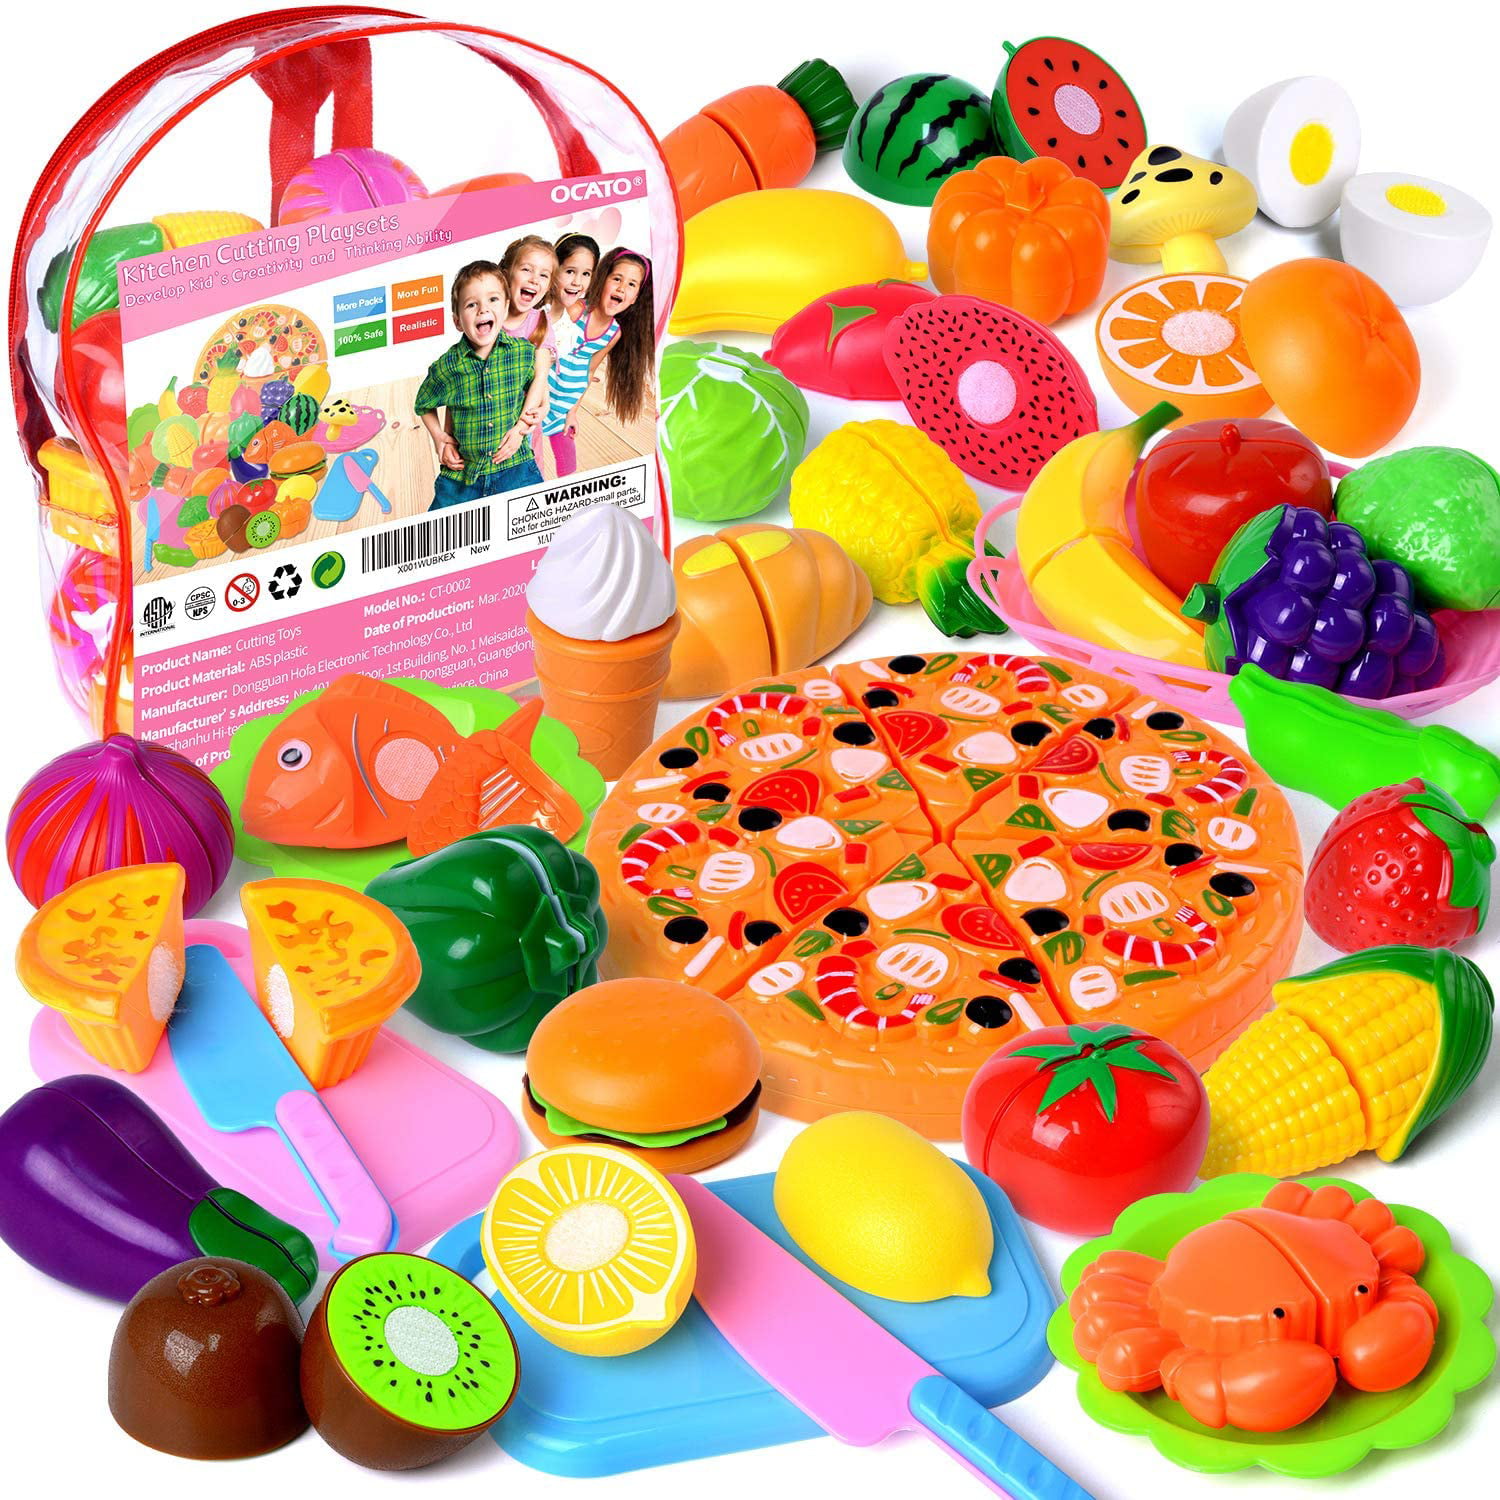 Kids Pretend Cutting Set Childs Toy Role Play Food Kitchen Fruit Vegetable Toy E 